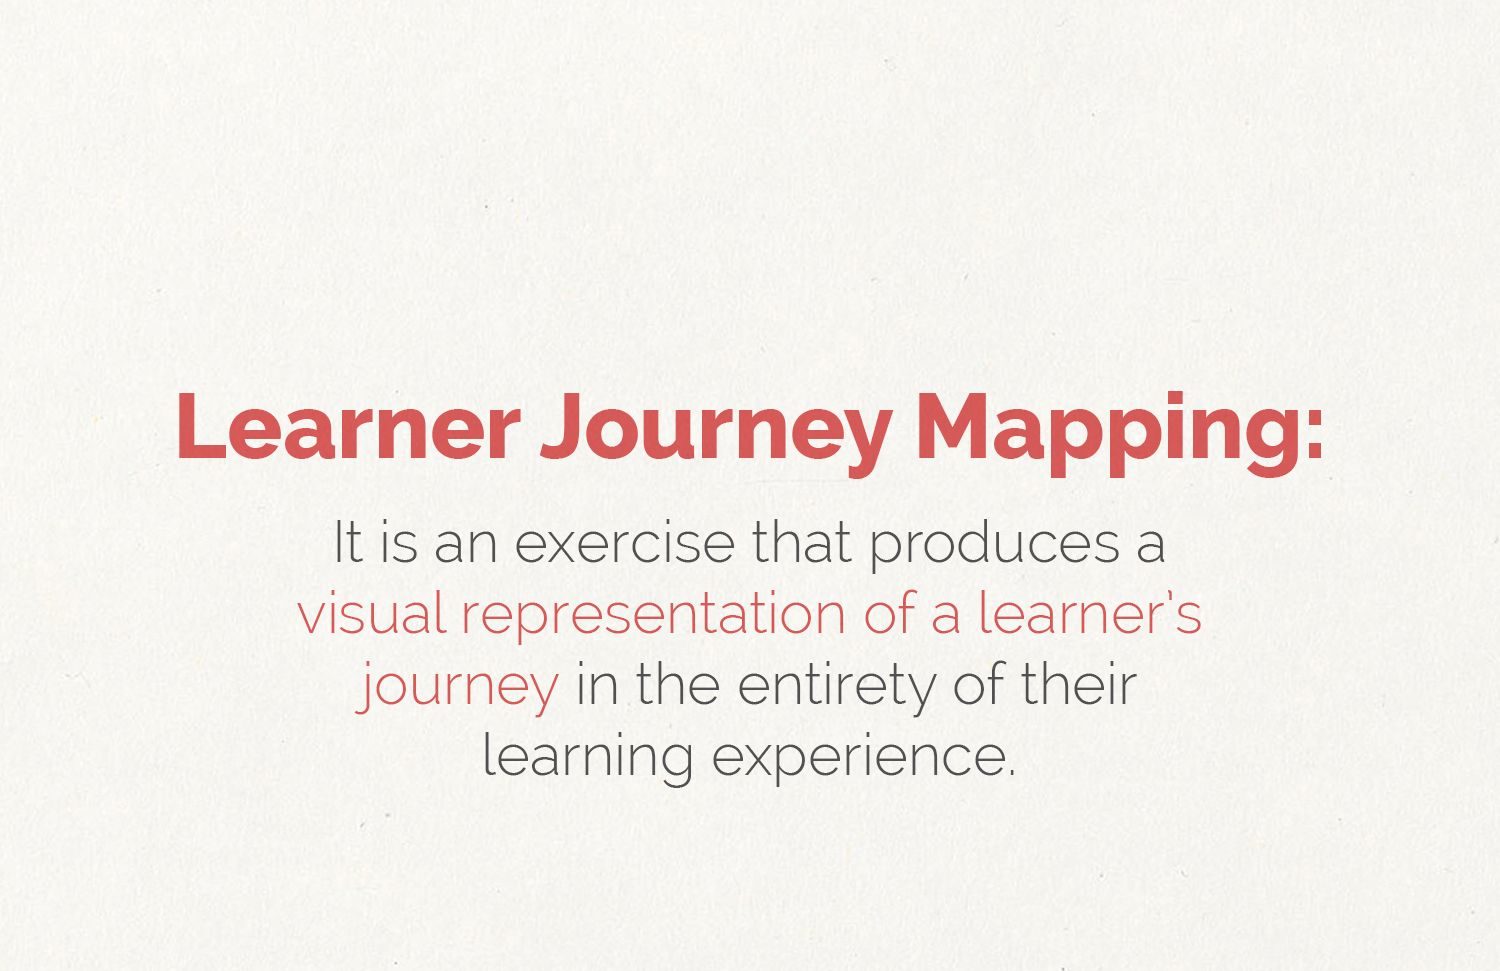 Learner Journey Mapping